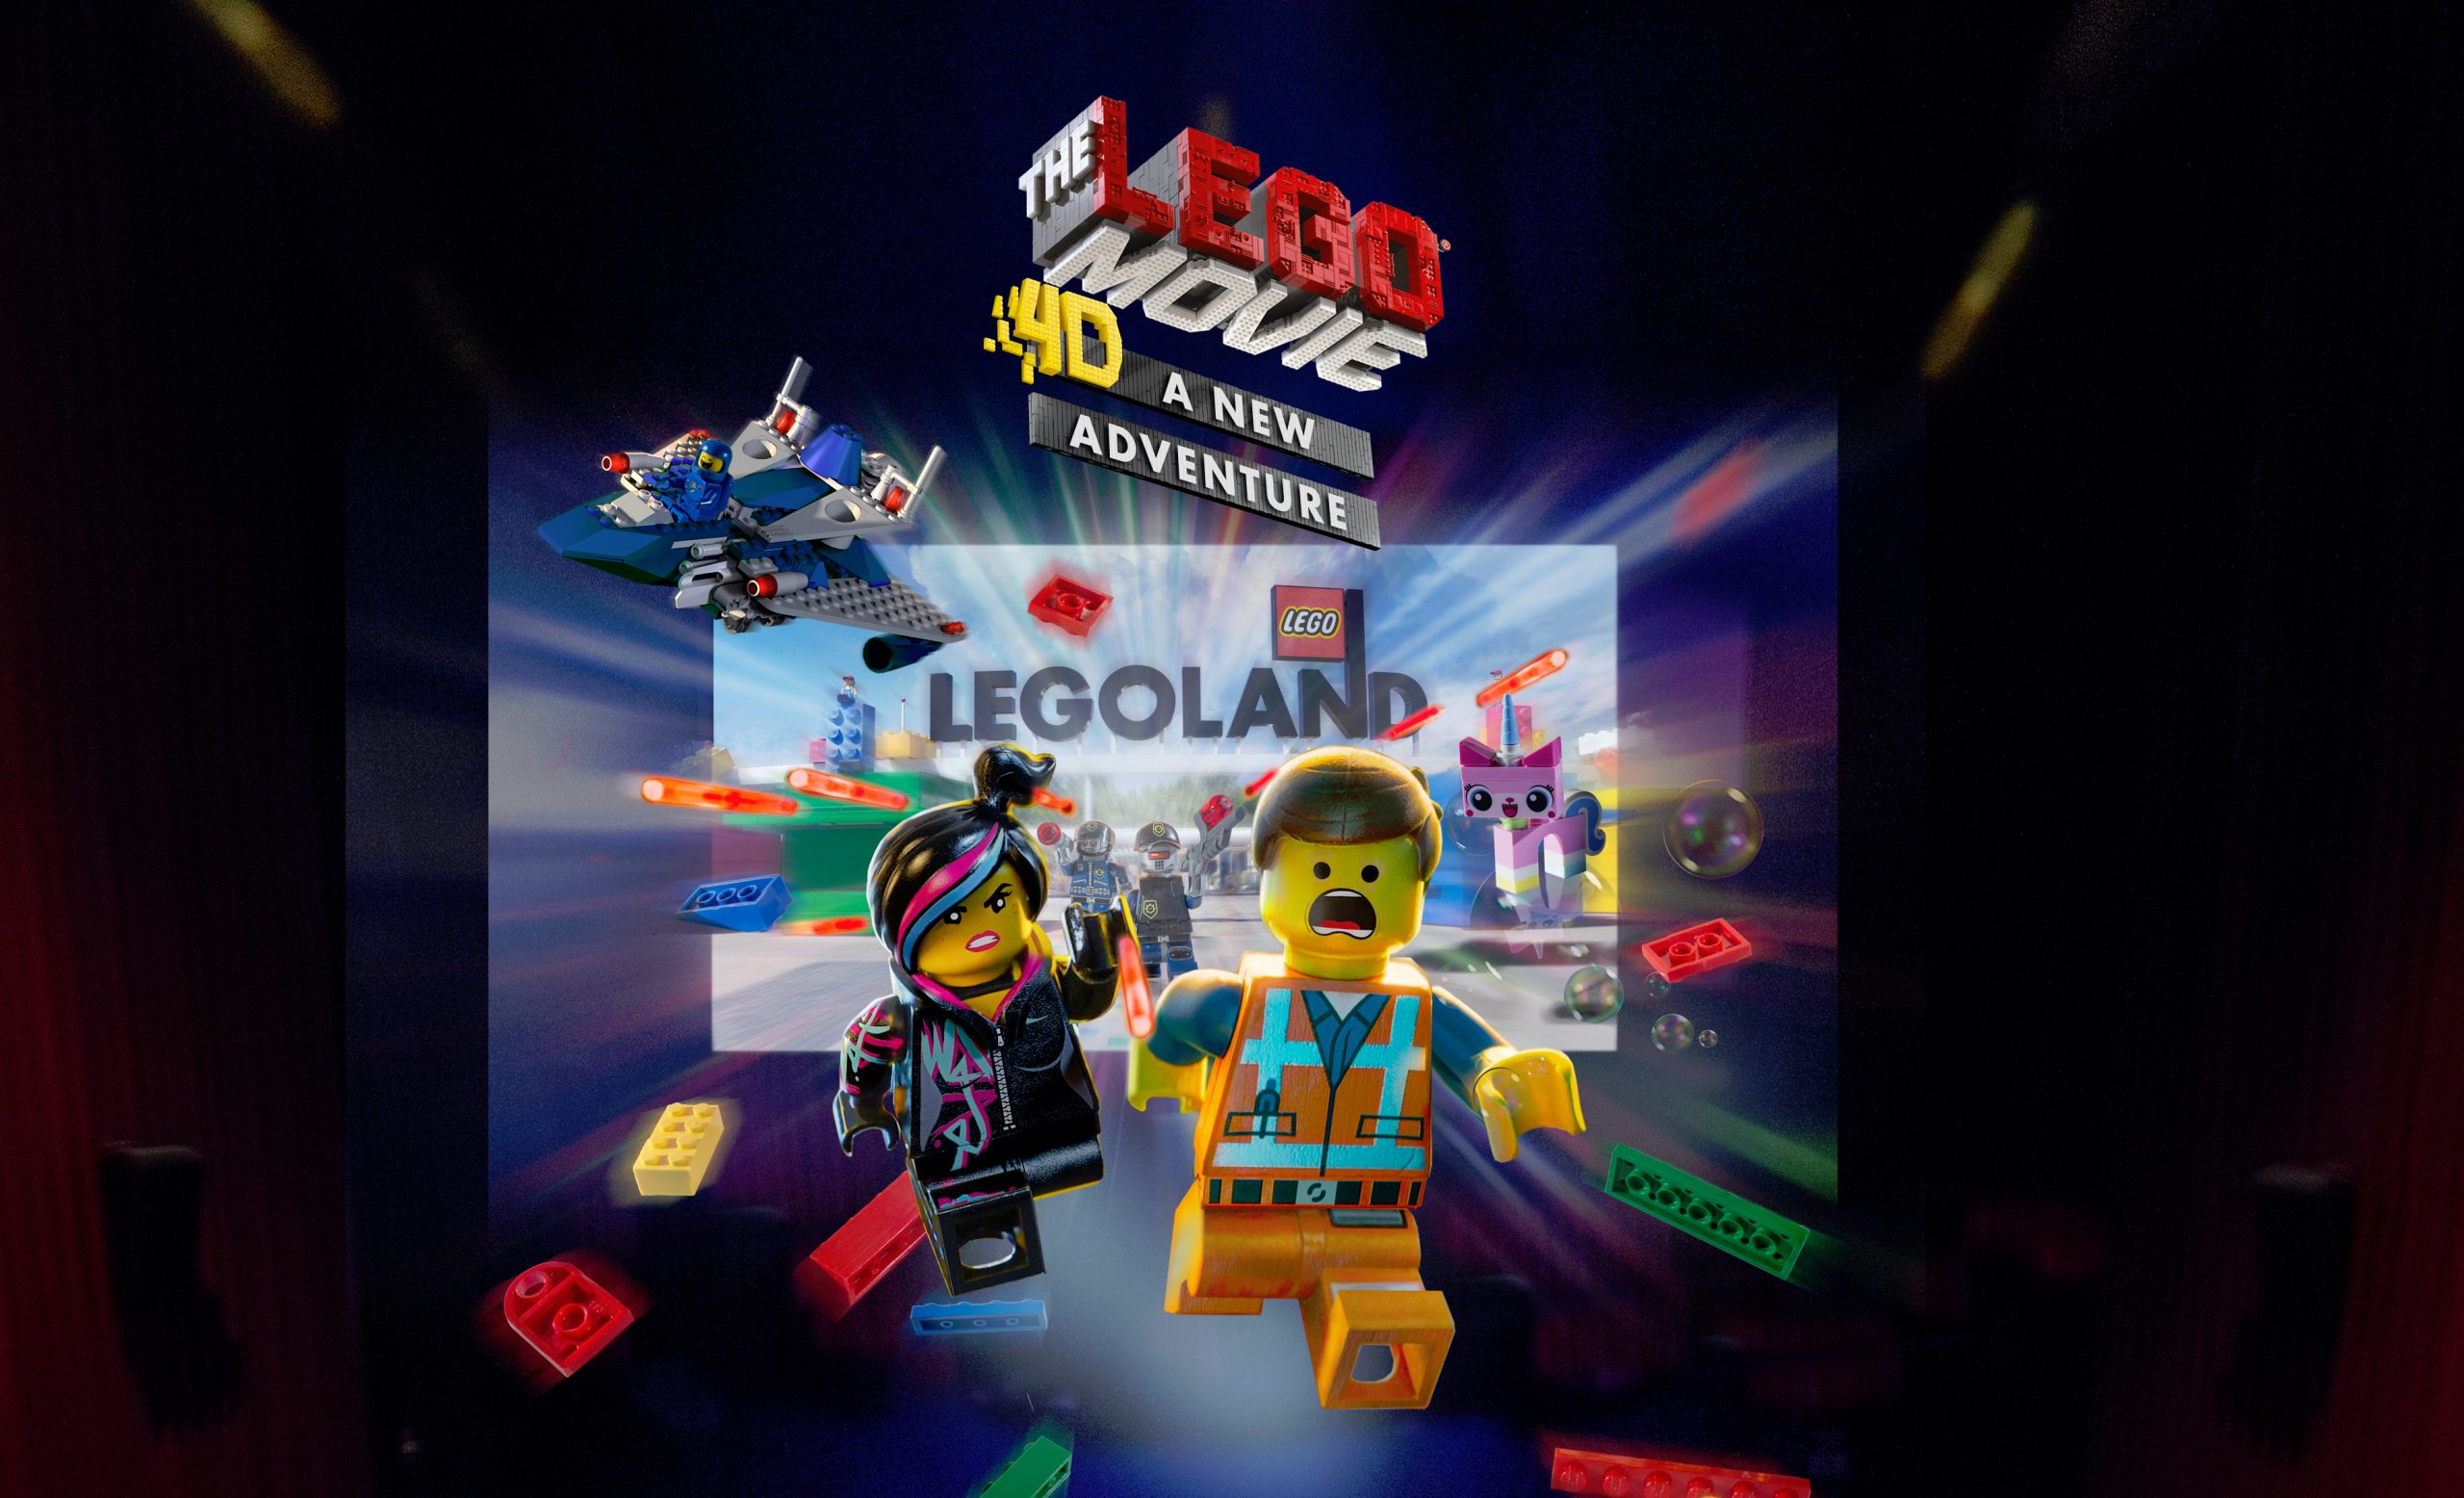 Legoland is Getting an Exclusive Lego Movie Sequel